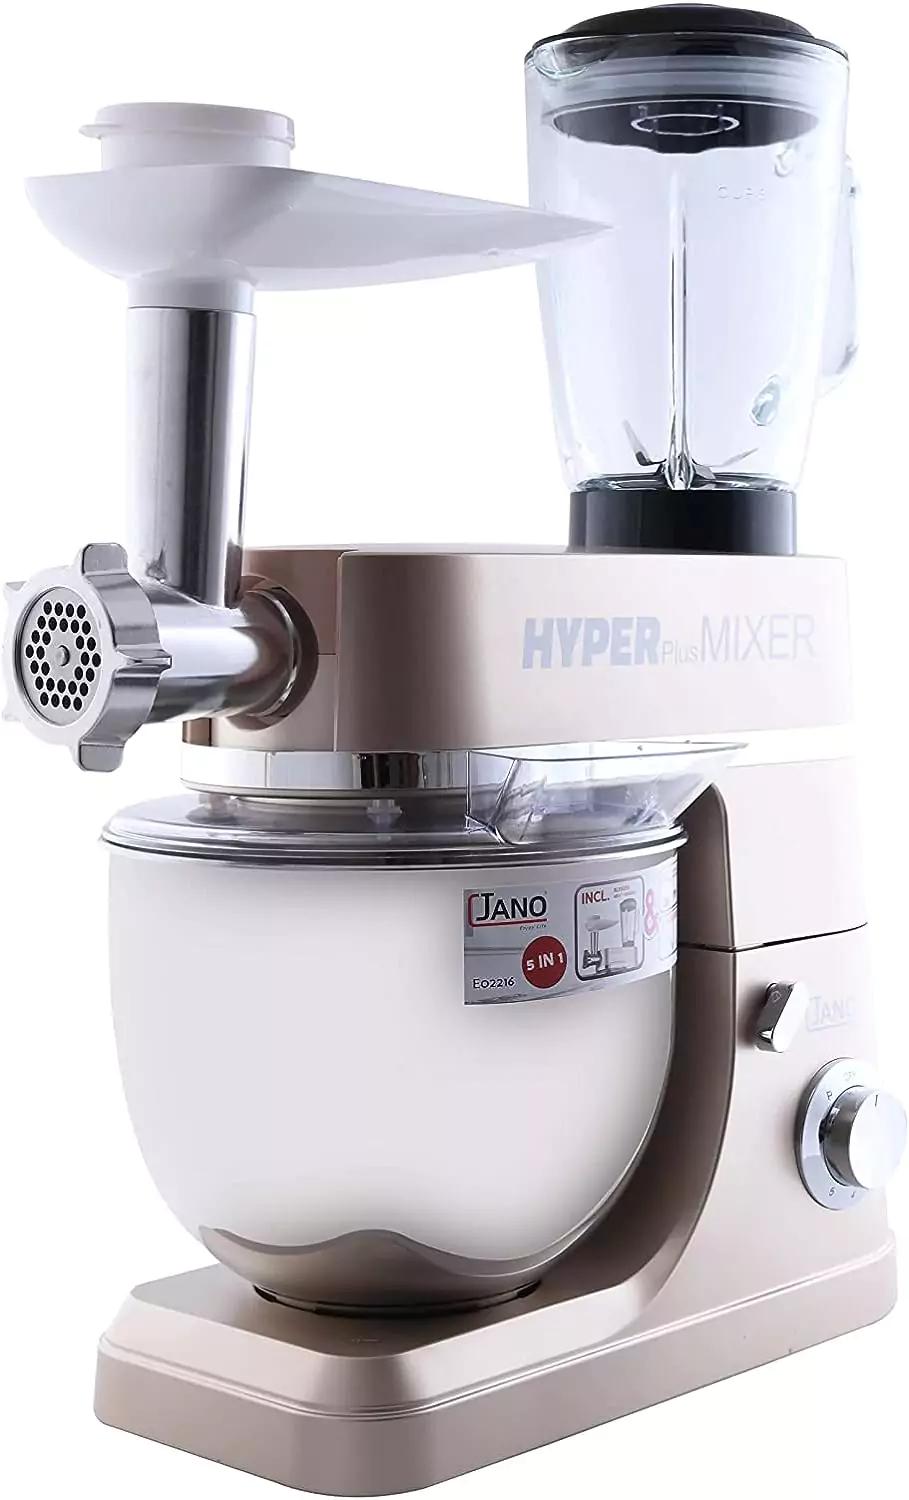 Electric stand mixer Hyper Plus 5 in 1 from Al Saif, with a bowl capacity of 7 liters, 1200 watts, golden color E02216